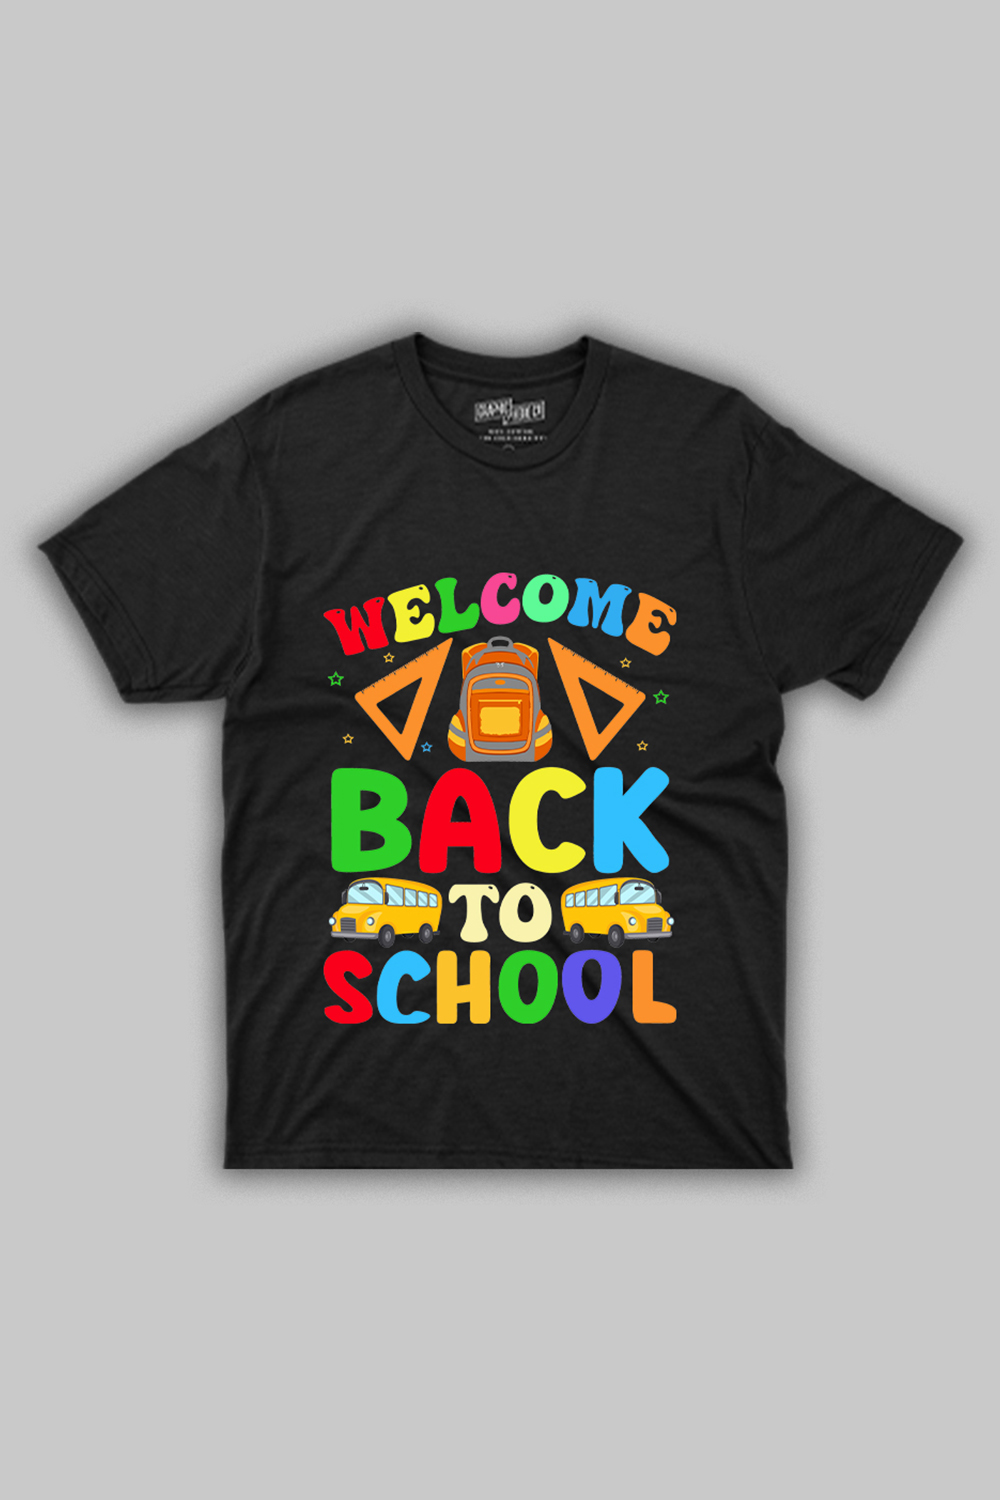 Image of a T-shirt with a great slogan Welcome Back To School